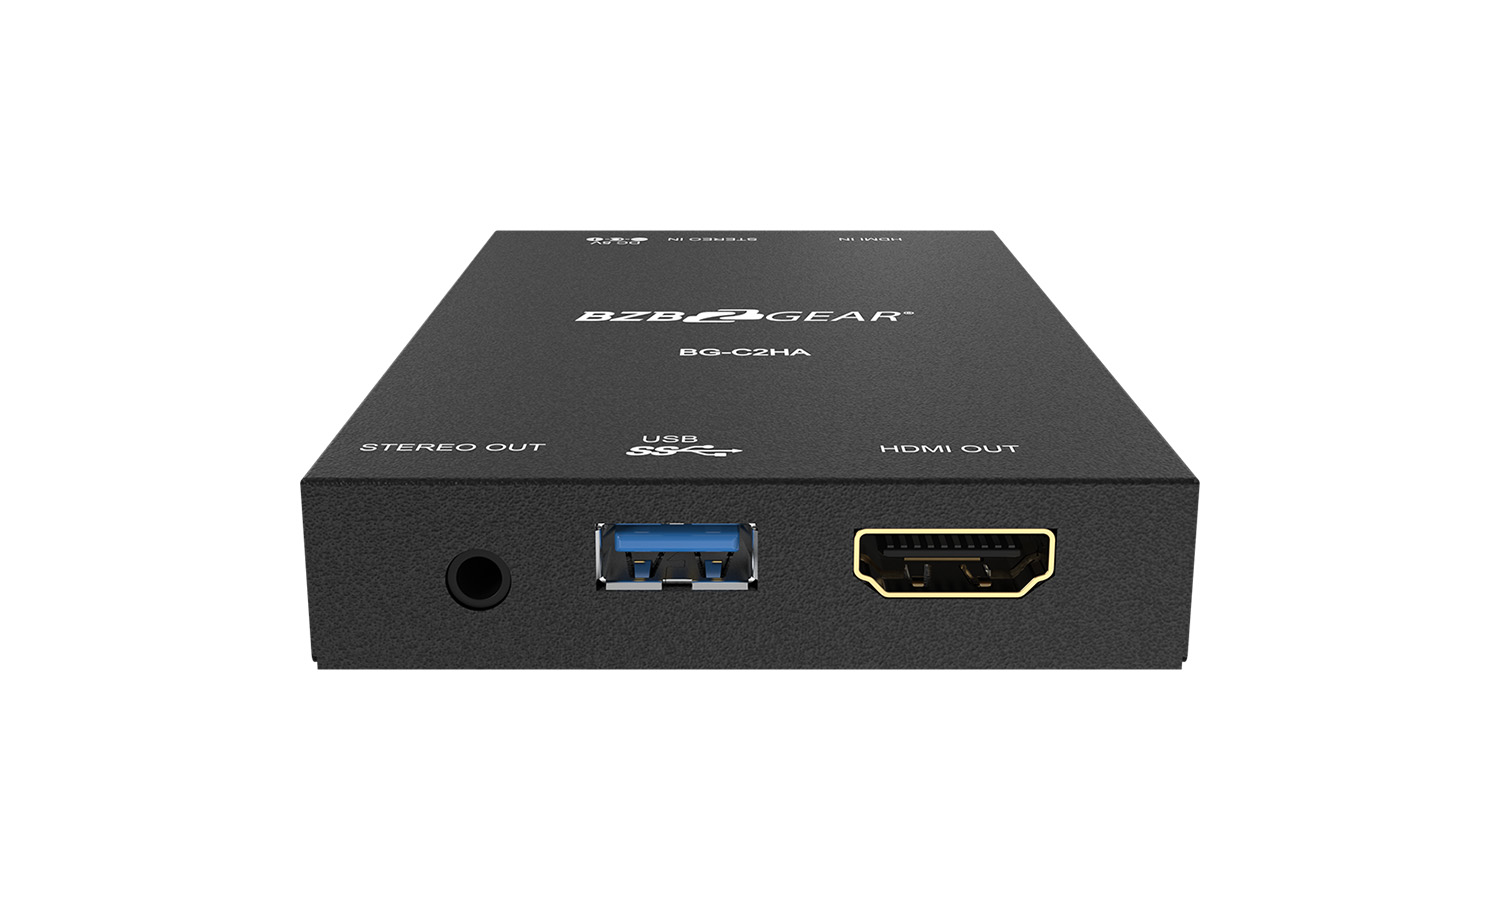 BG-C2HA USB 3.0 1080P FHD Video Capture Device With HDMI Loop Out and Audio by BZBGEAR